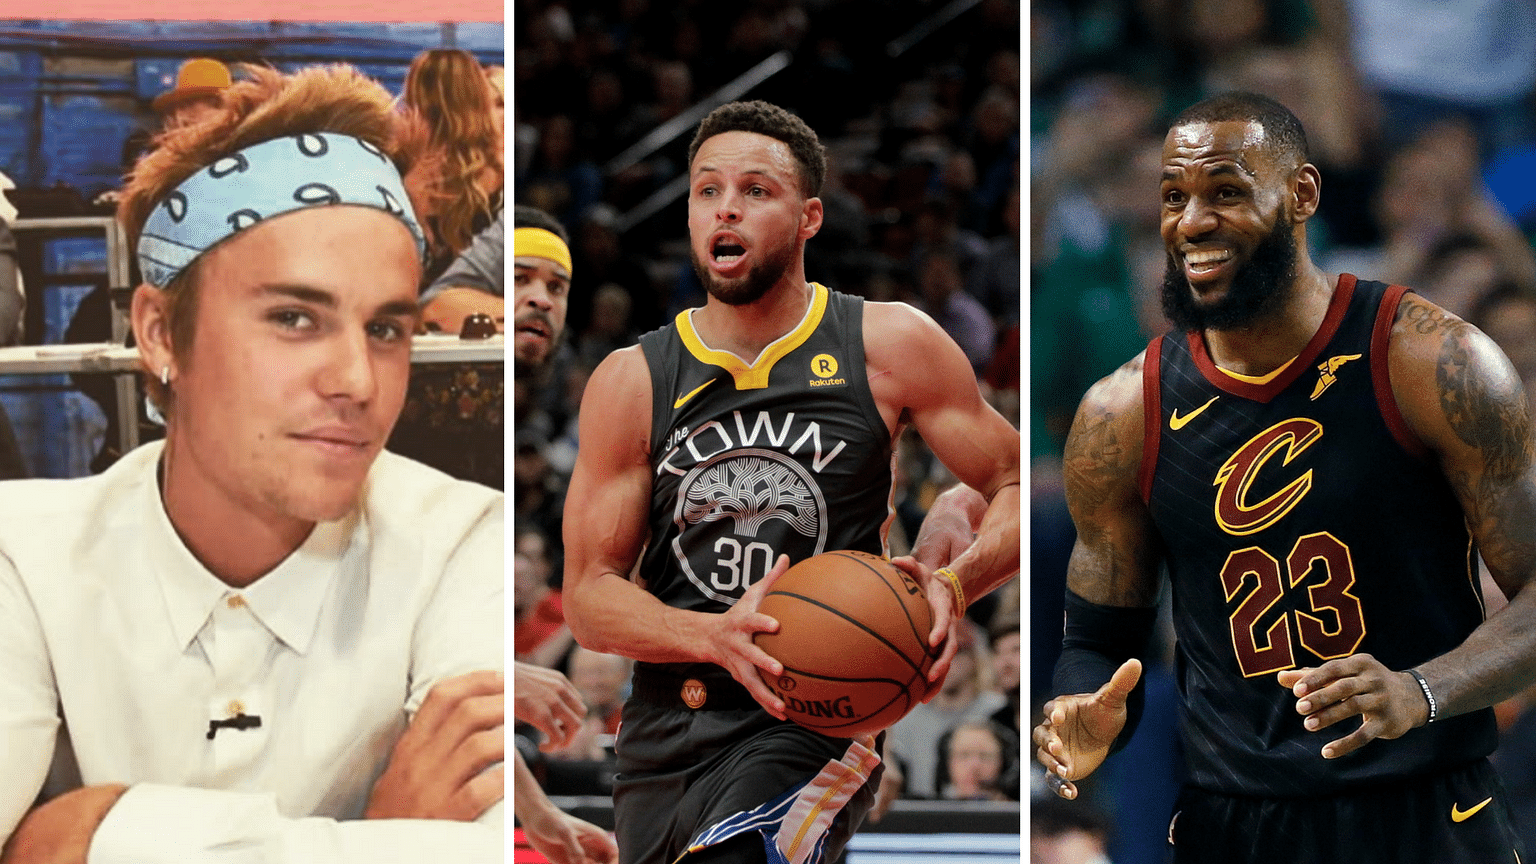 Justin Bieber, Steph Curry and LeBron James headline the NBA All-Star Weekend in LA.